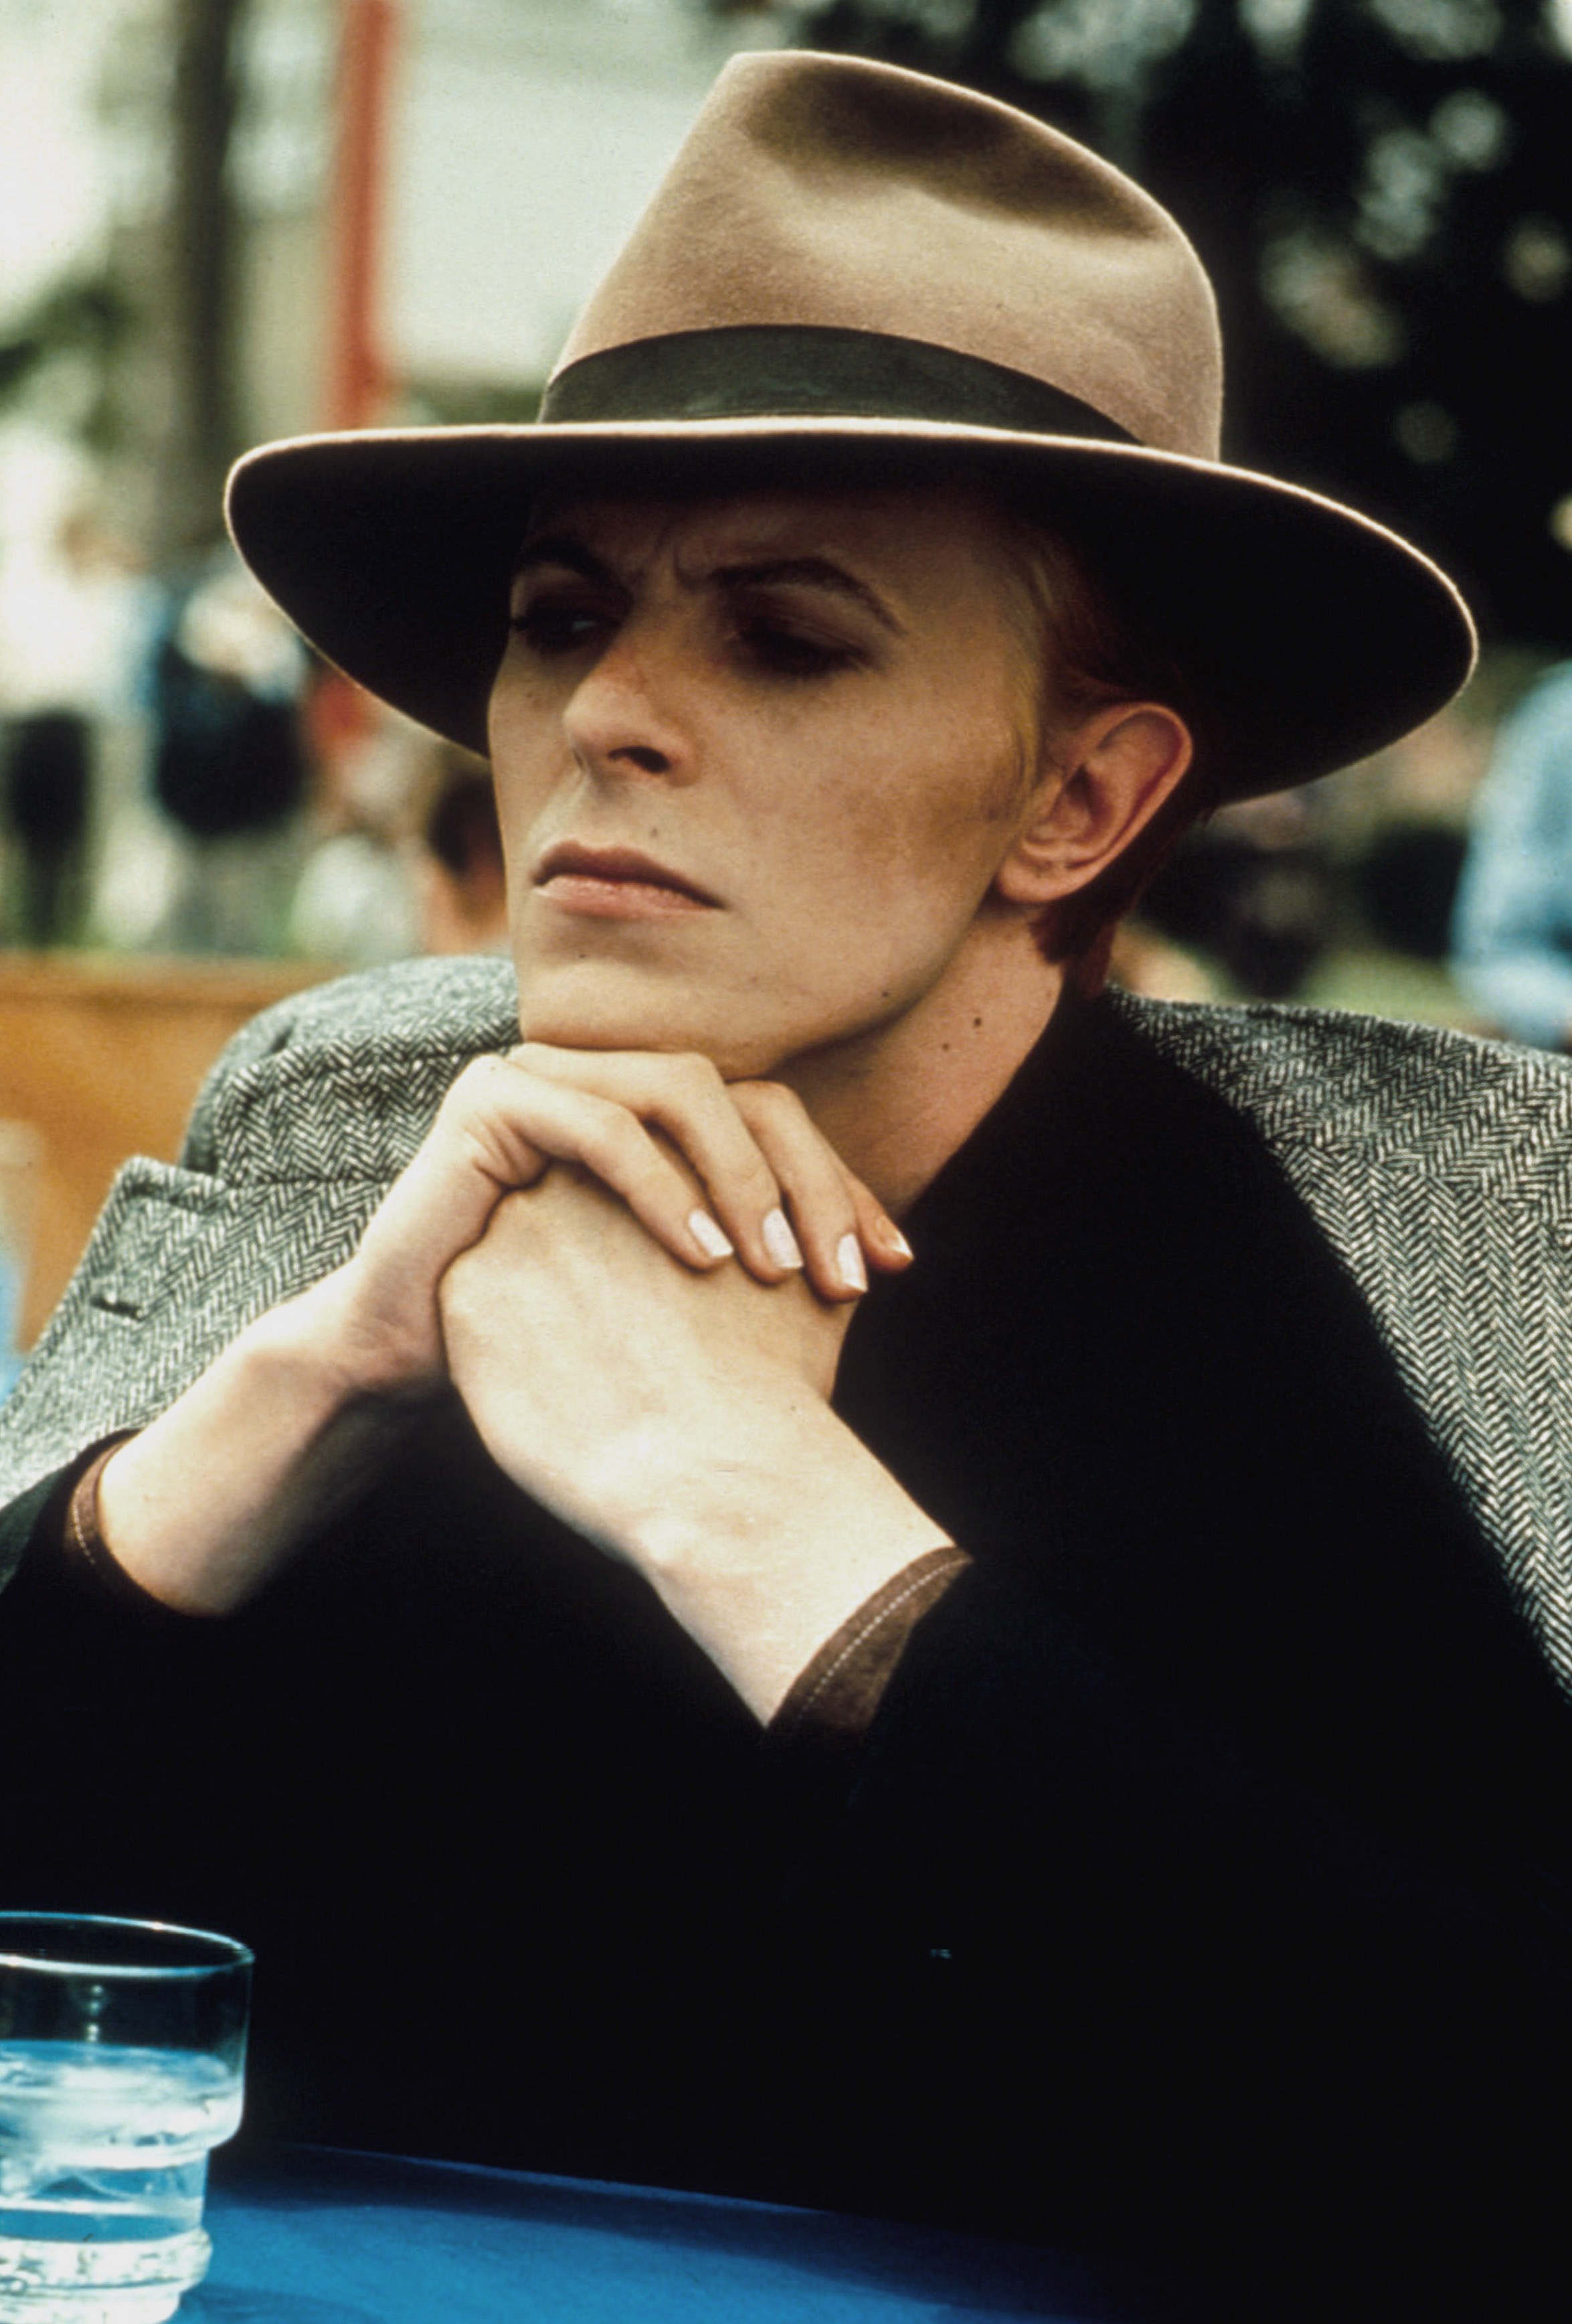 David Bowie in "The Man Who